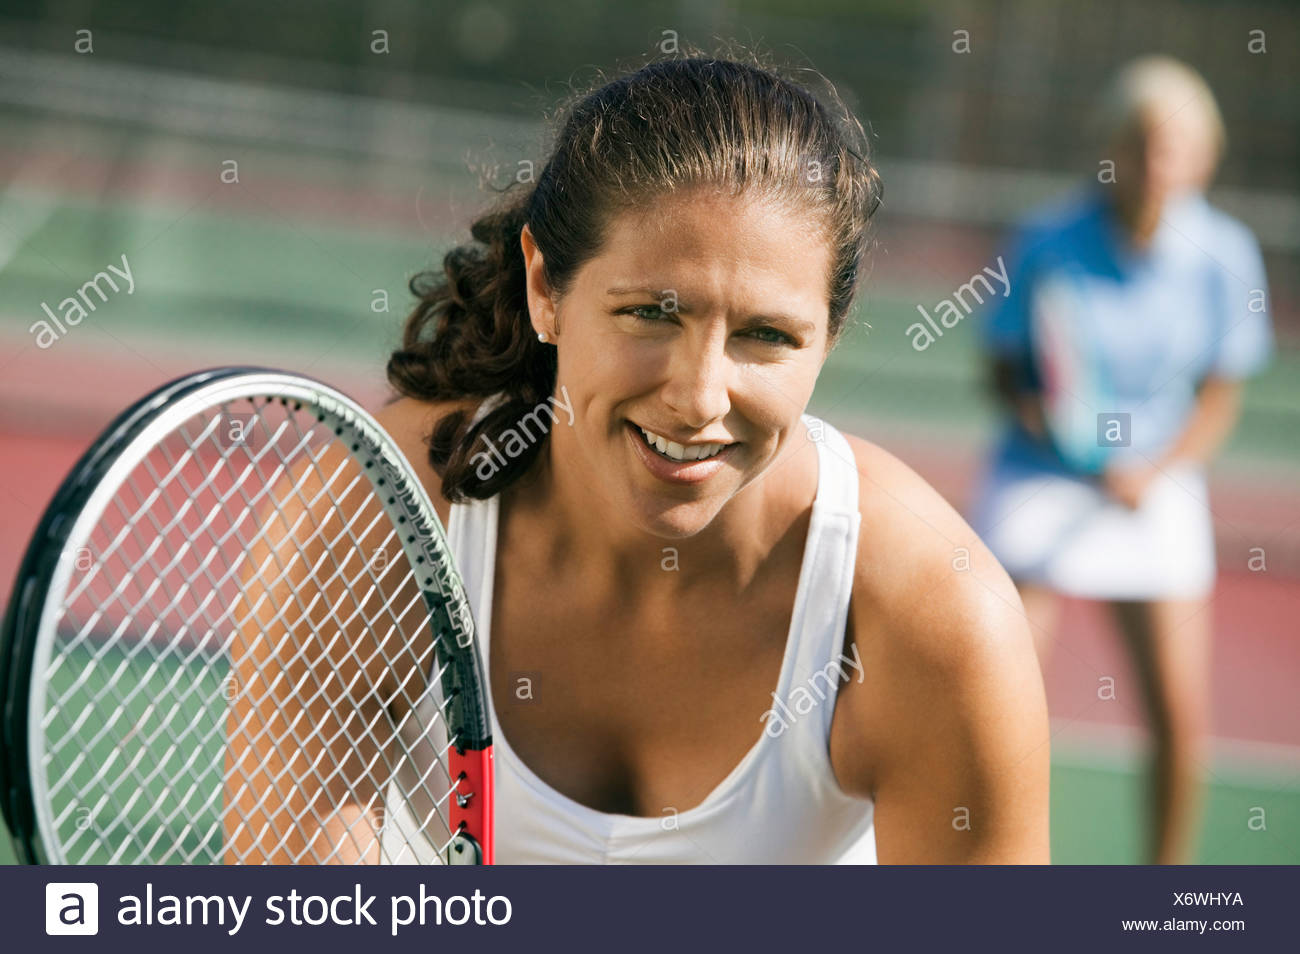 Female Doubles Tennis Players Waiting For Serve Focus On Foreground Close Up Stock Photo Alamy